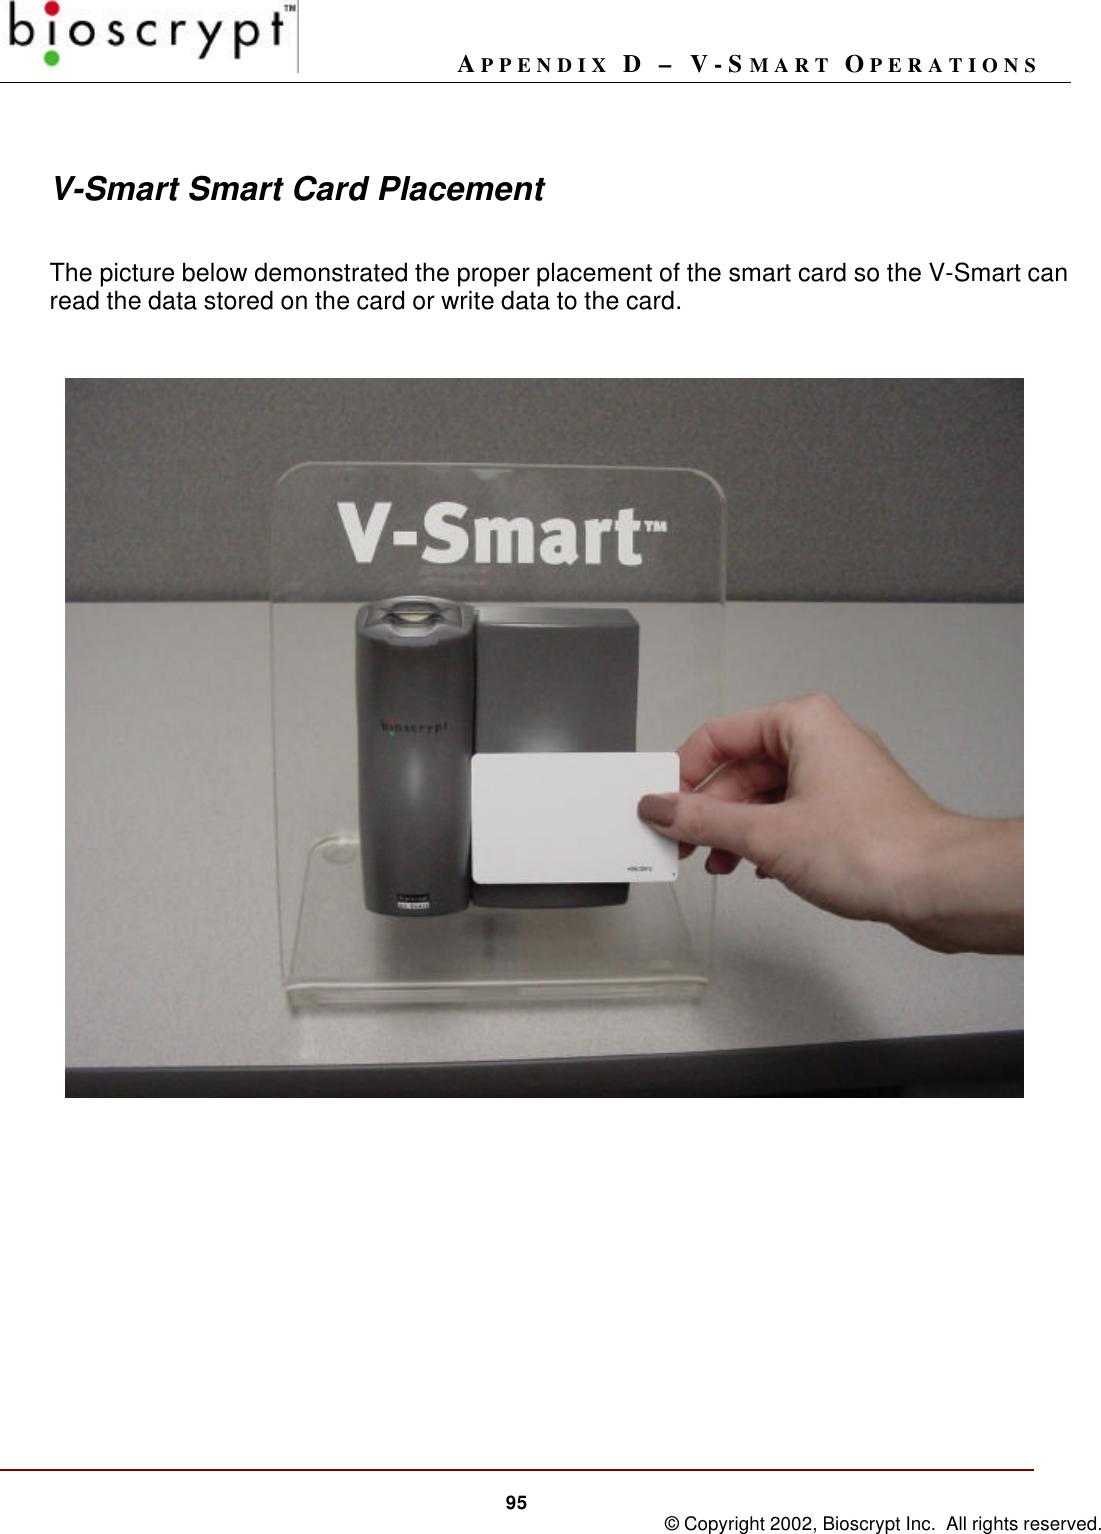 APPENDIX D – V-SMART OPERATIONS95 © Copyright 2002, Bioscrypt Inc.  All rights reserved.V-Smart Smart Card PlacementThe picture below demonstrated the proper placement of the smart card so the V-Smart canread the data stored on the card or write data to the card.